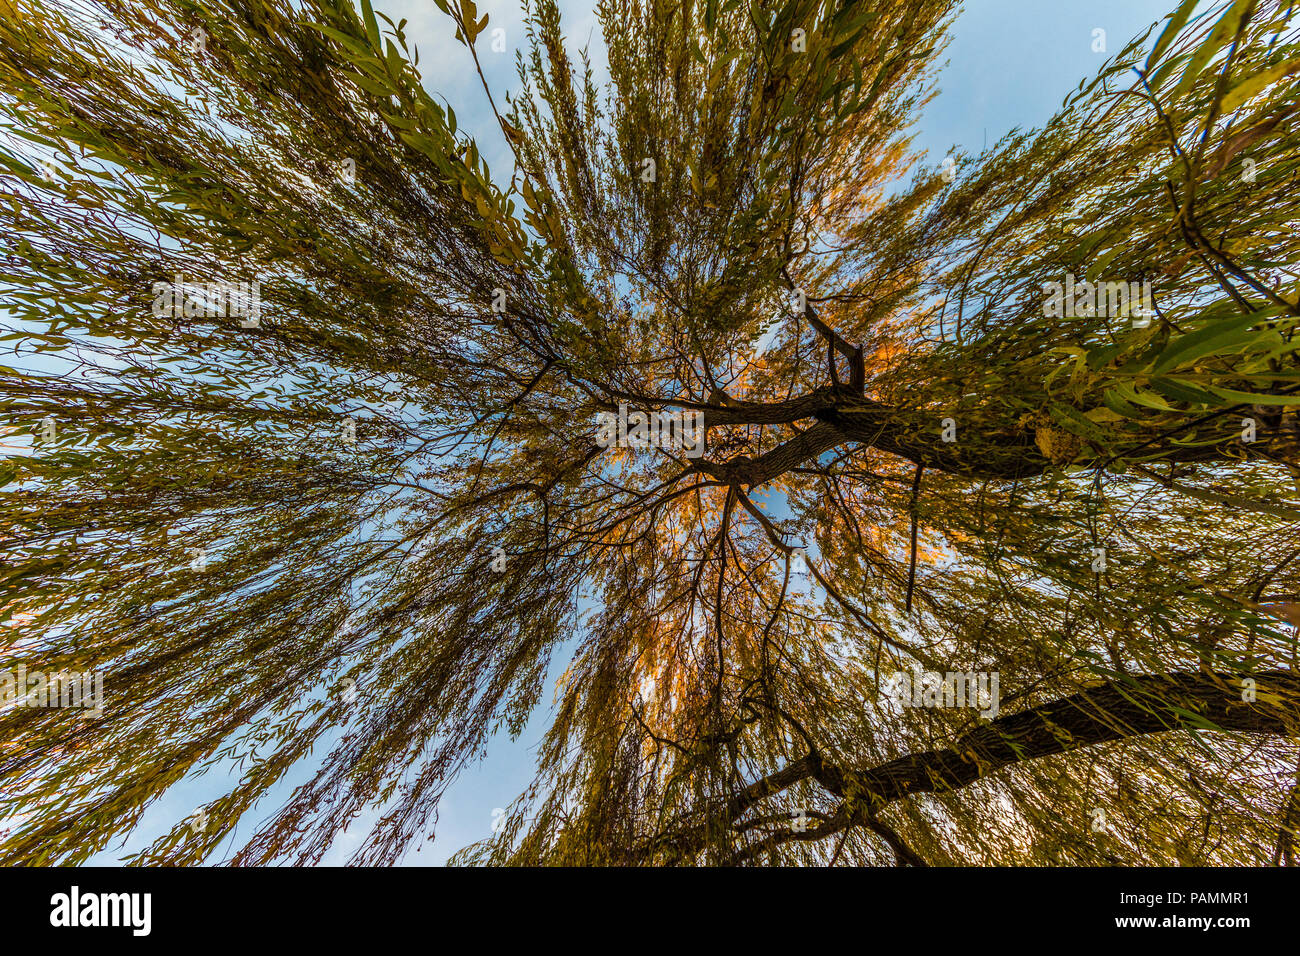 weeping willow, wide angle view from below Stock Photo